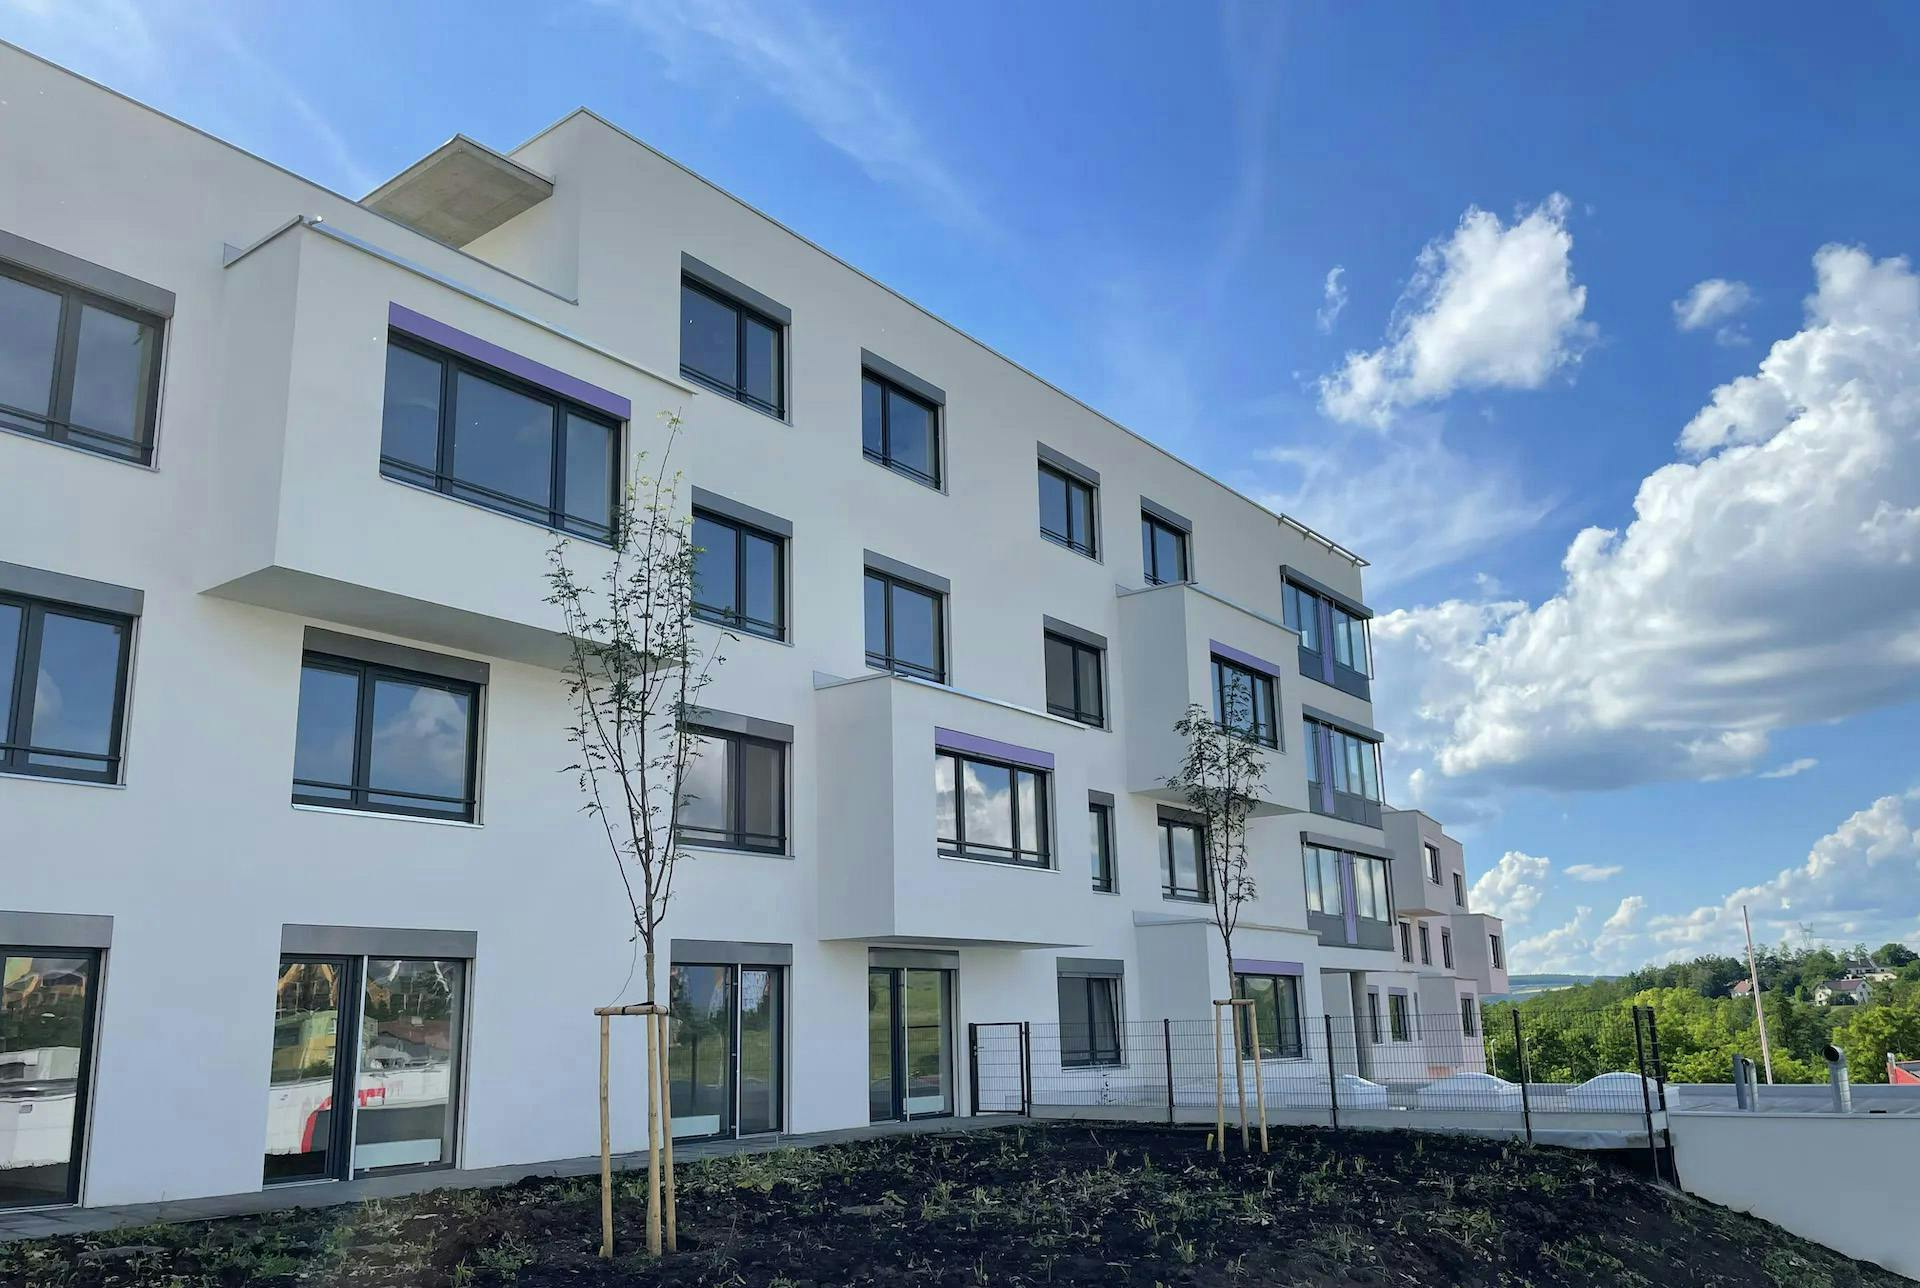 Care home Dobré časy continues to grow: first clients and more room to invest